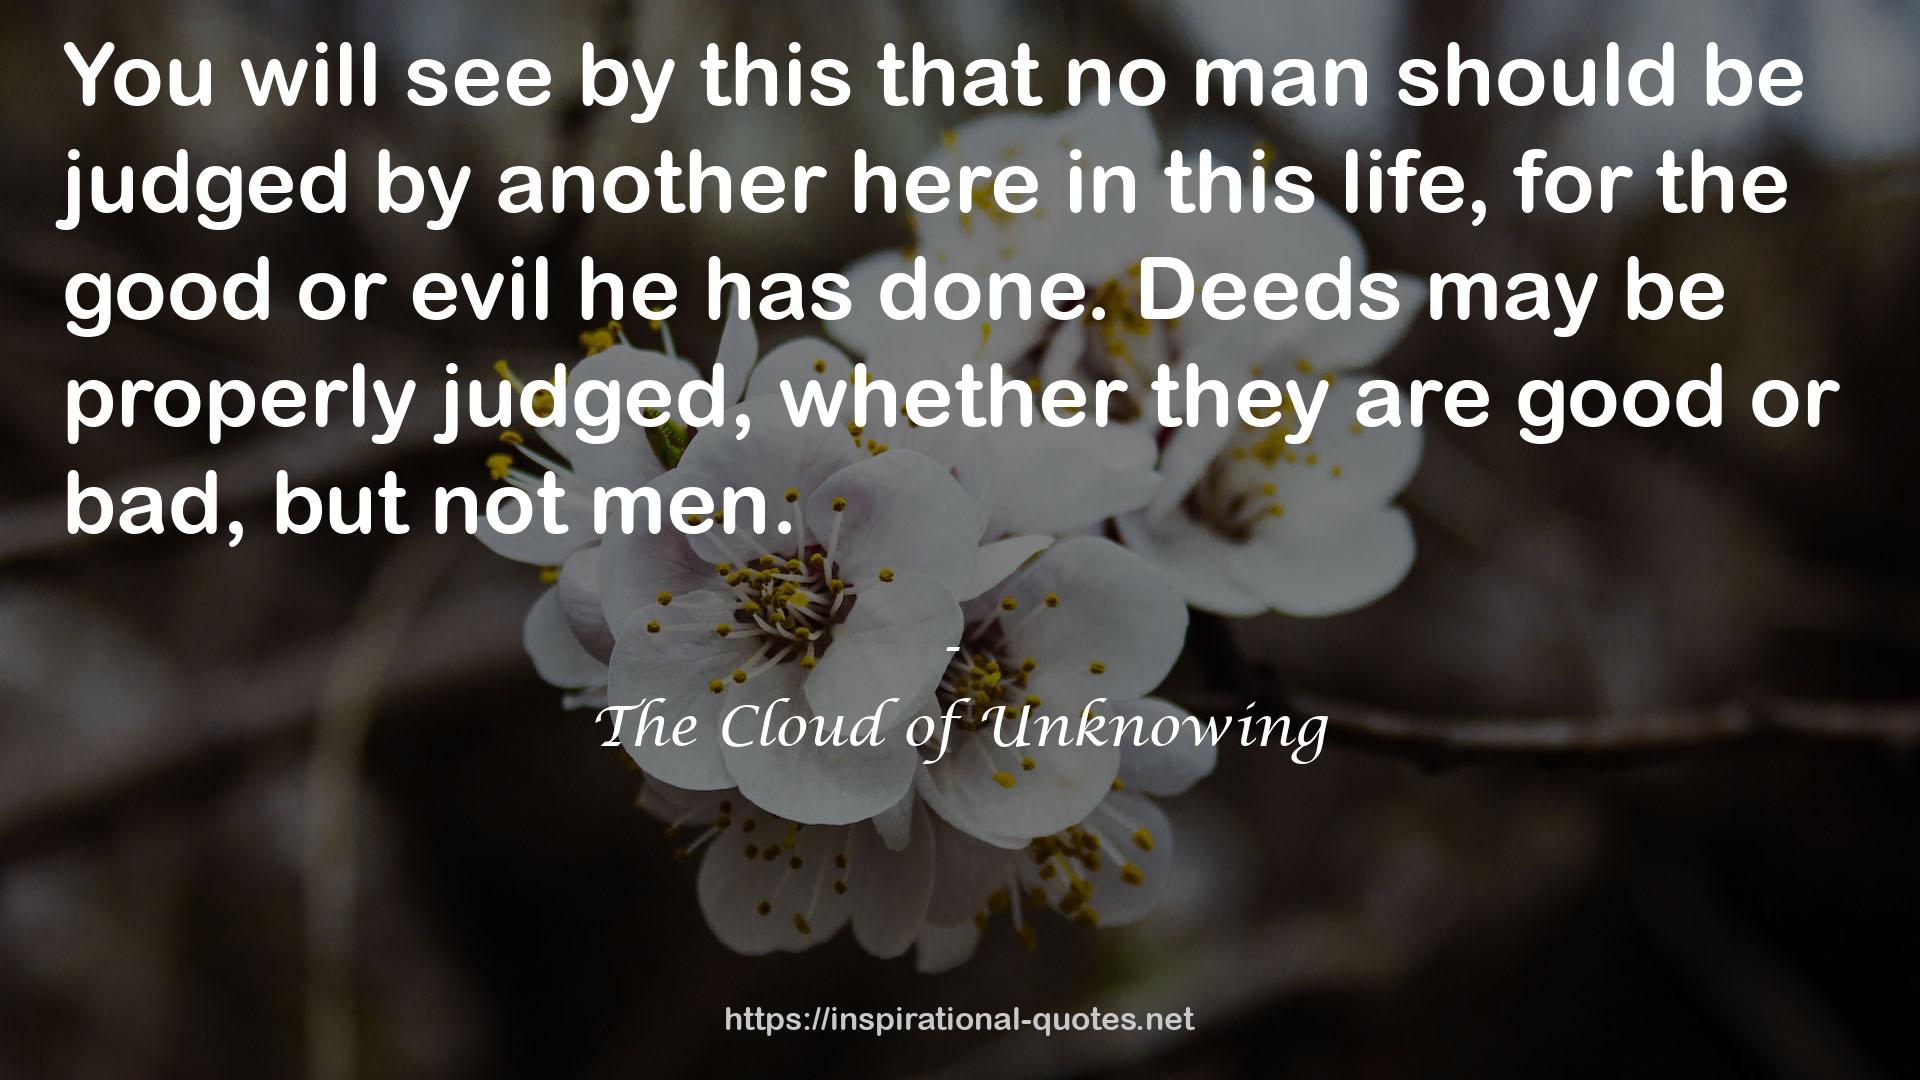 The Cloud of Unknowing QUOTES